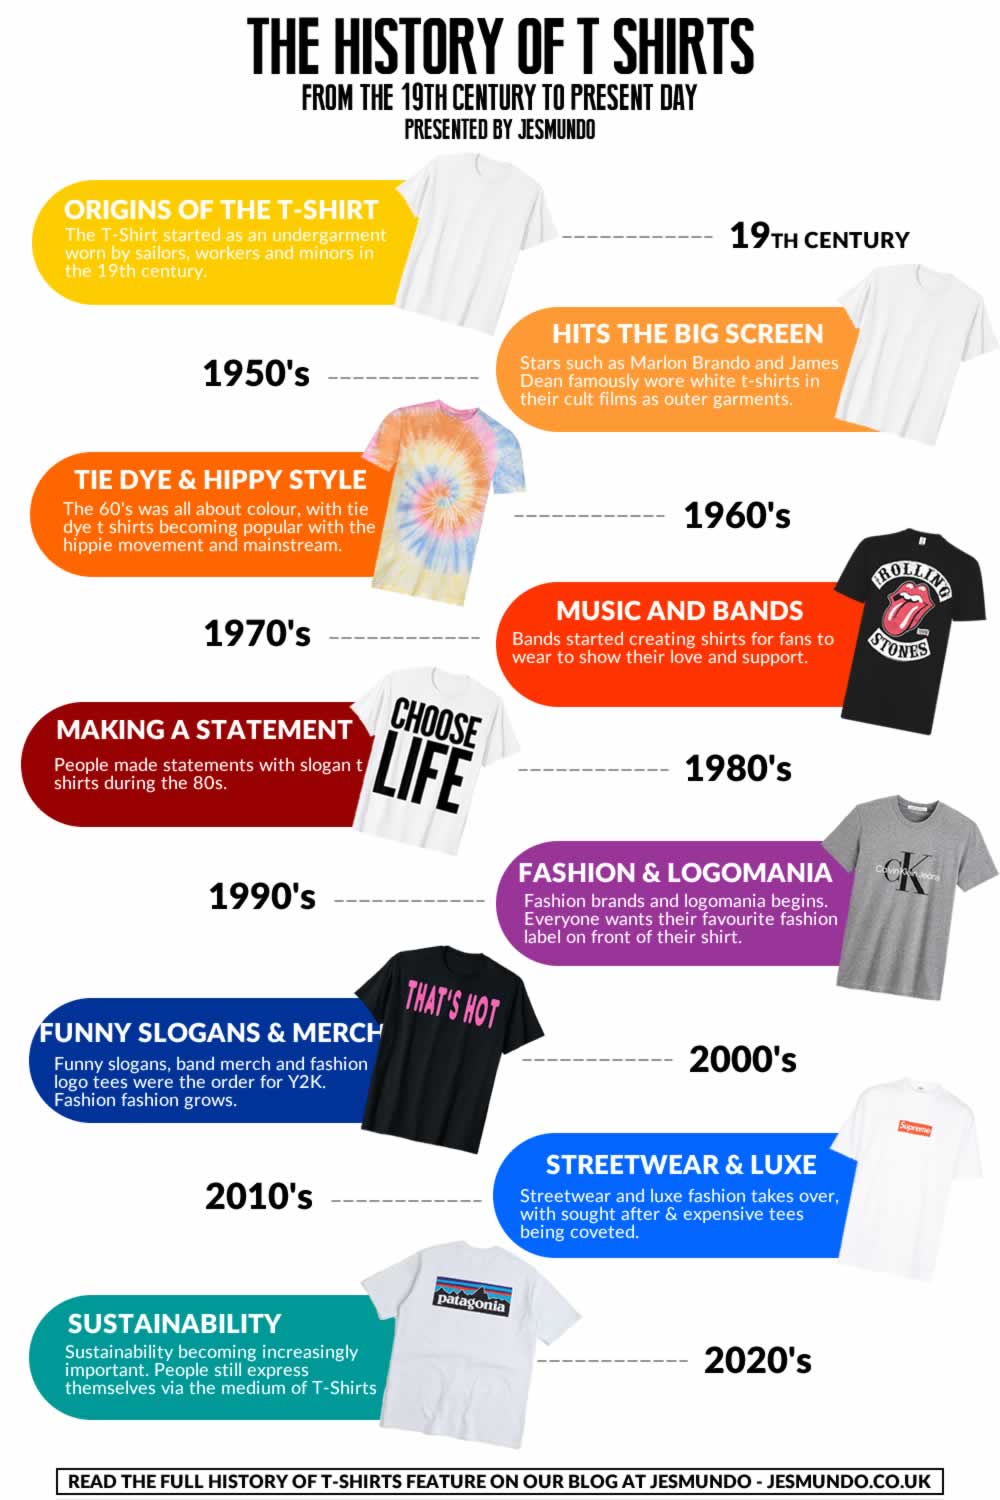 The History Of T-Shirts Timeline - From 19th Century To Present Day